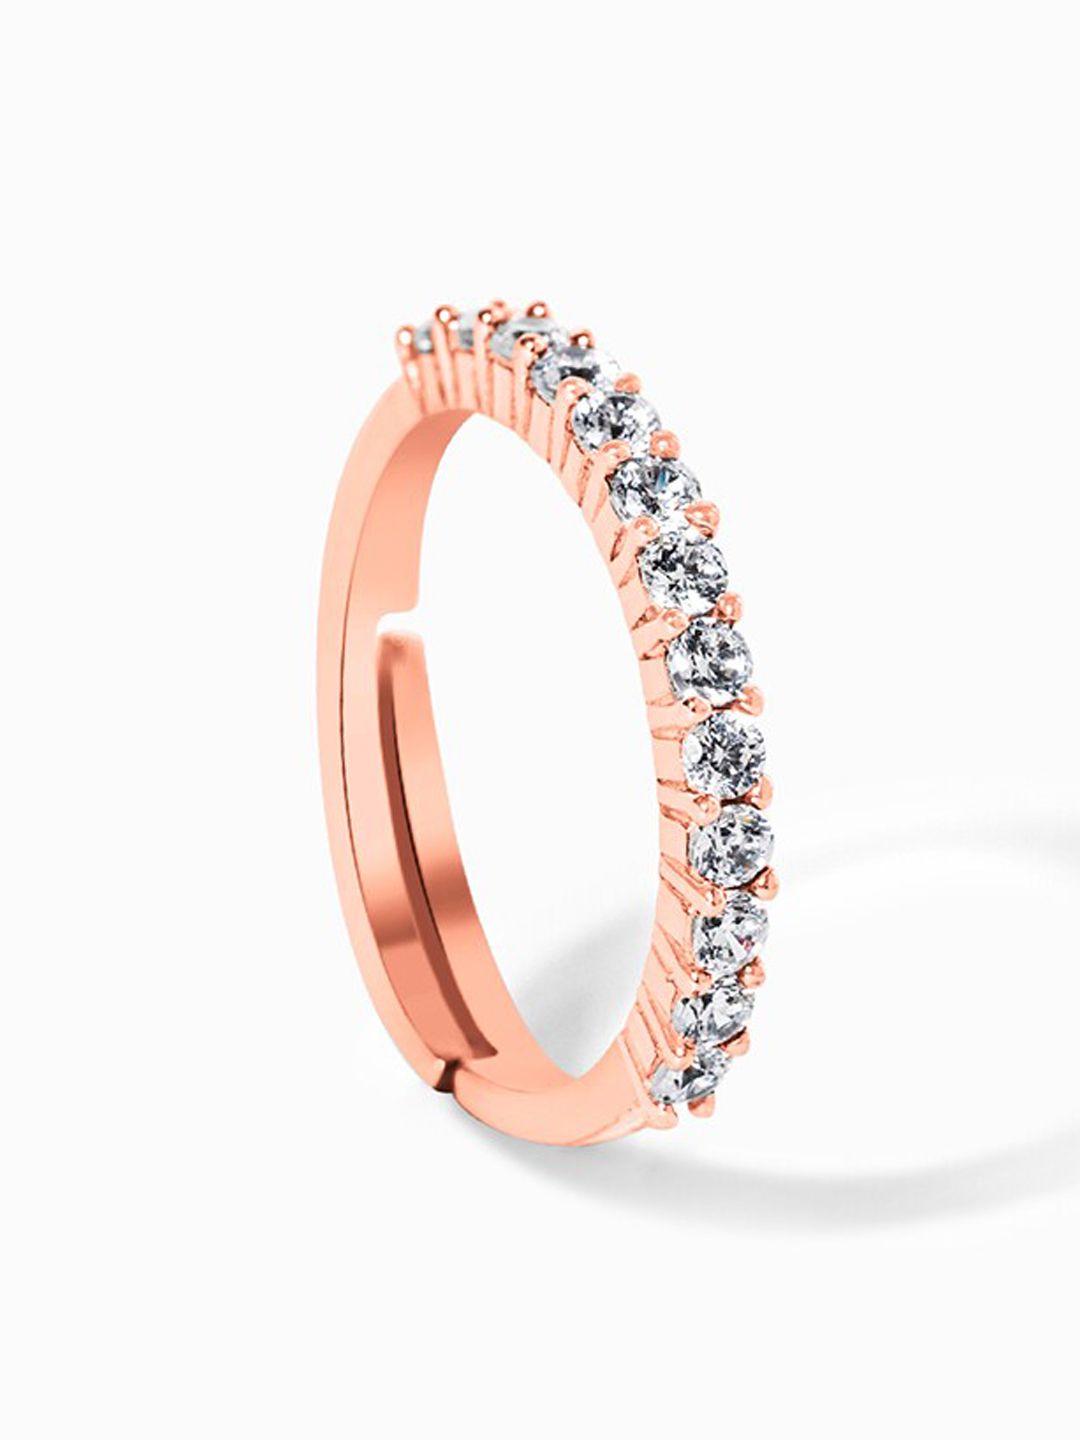 Mikoto by FableStreet 925 Sterling Silver Rose Gold-Toned  Finger Ring Price in India